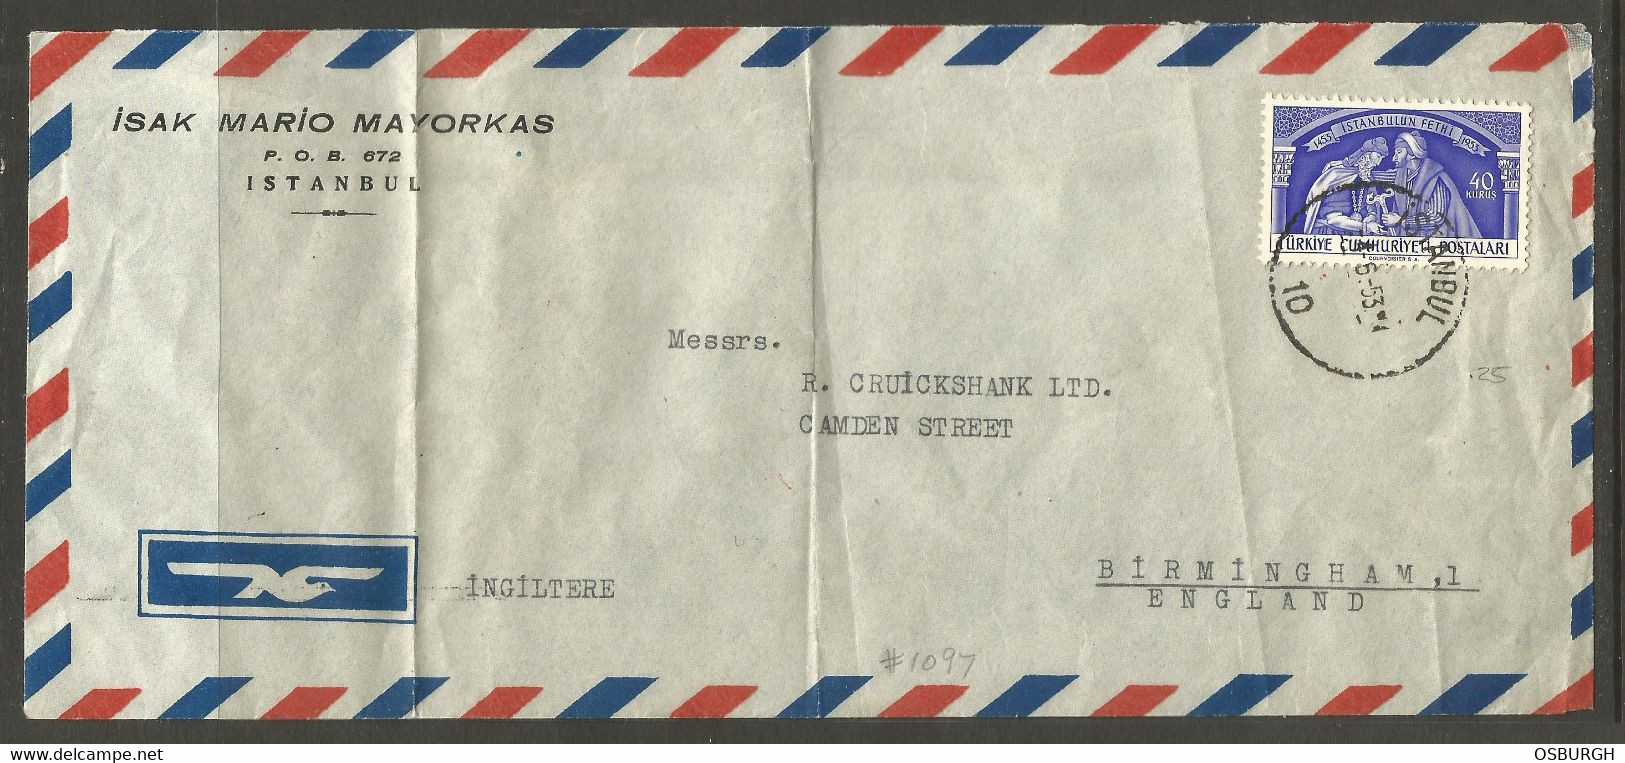 TURKEY. 1953. AIR MAIL COVER. ISTANBUL. ISAK MARIO MAYORKAS. ADDRESSED TO BIRMINGHAM. - Covers & Documents